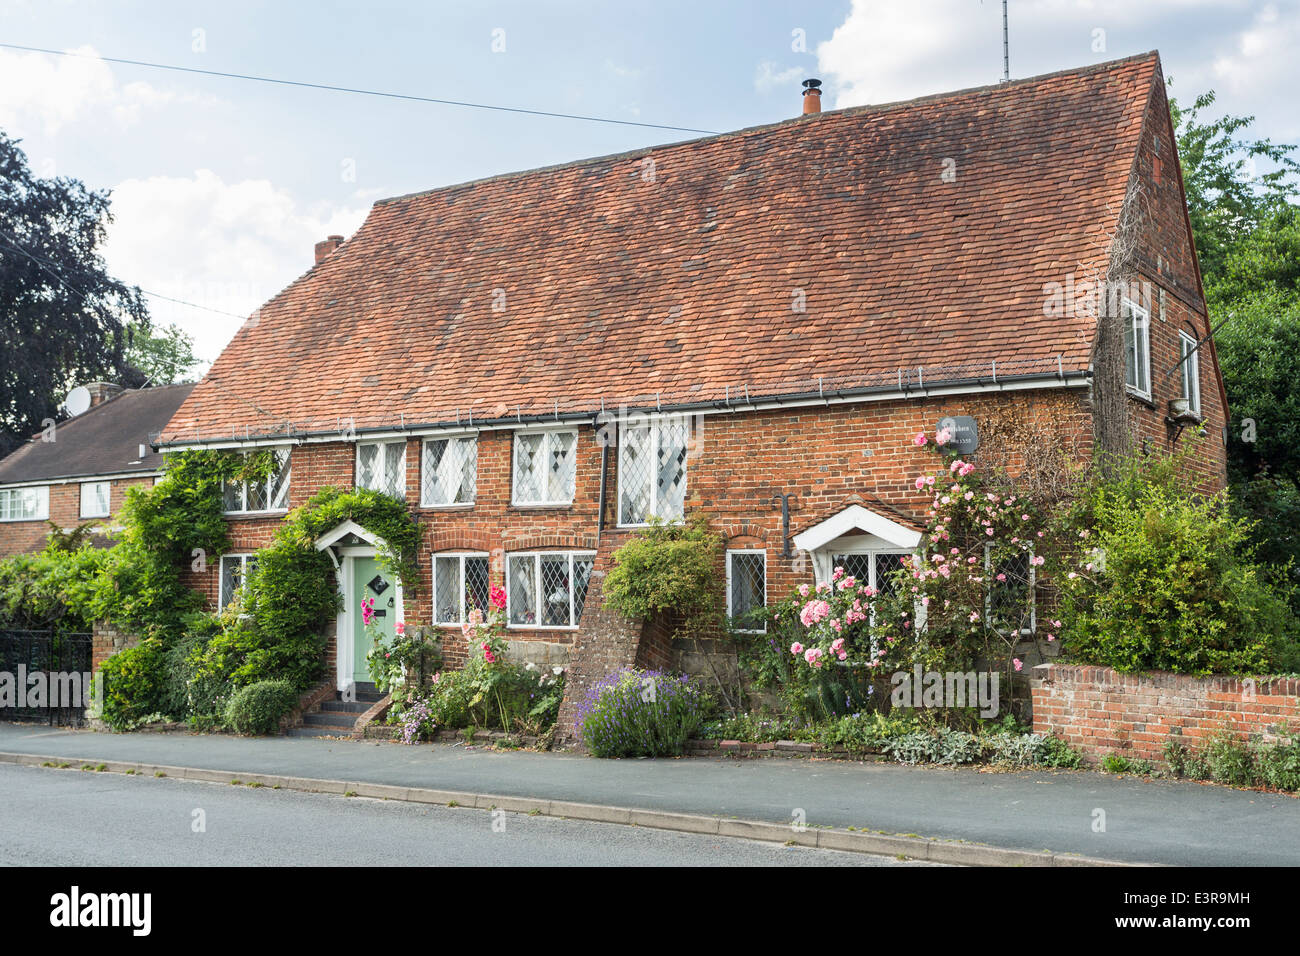 Fourteenth century cottage in the village of Ash near Guildford, Surrey, UK with hollyhocks and roses around the windows Stock Photo